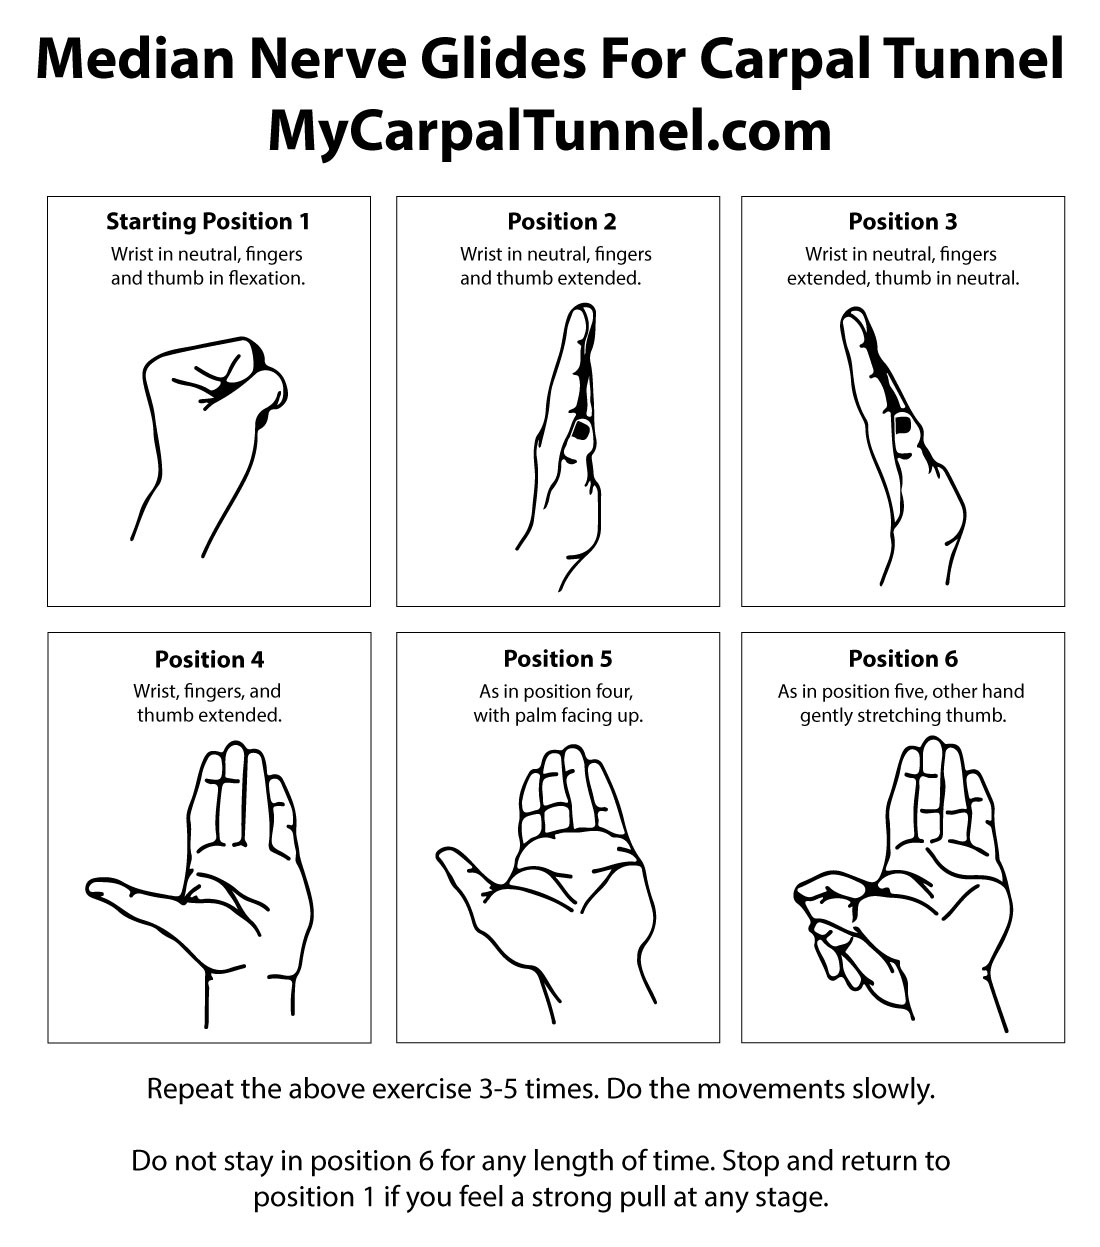 Exercises Carpal Tunnel Exercises